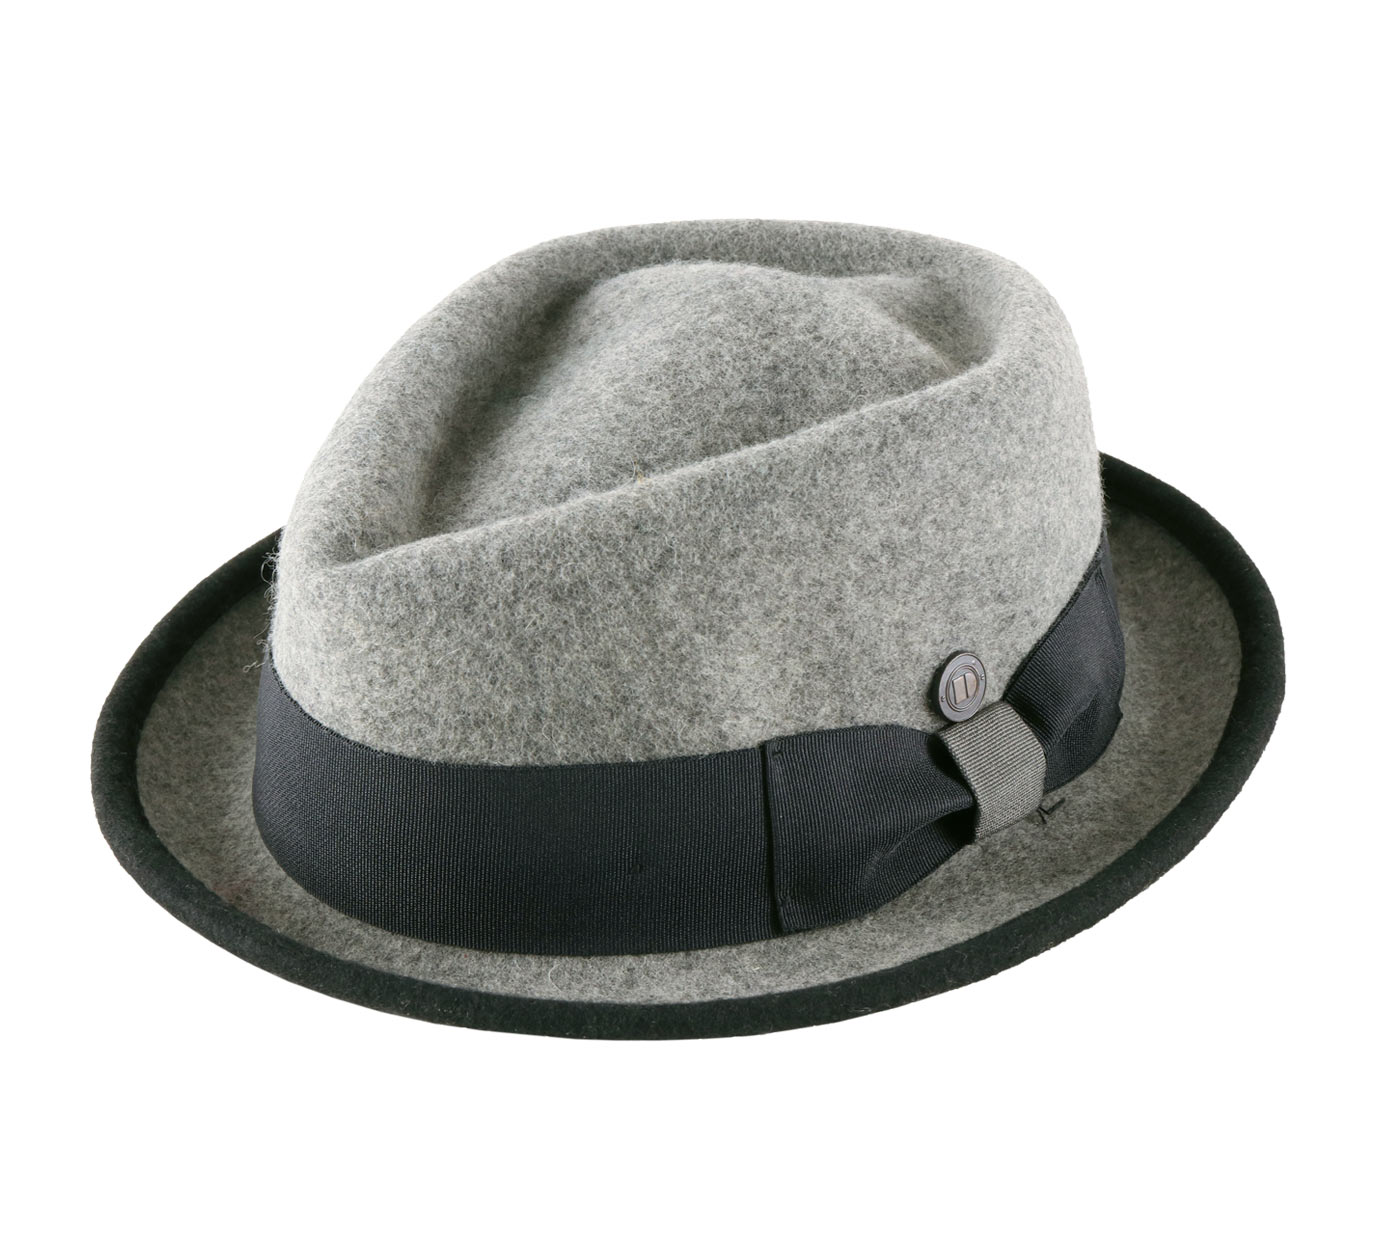 Mens Bailey of Hollywood Wynn Wool Felt Crushable Trilby Hat Made in the USA 